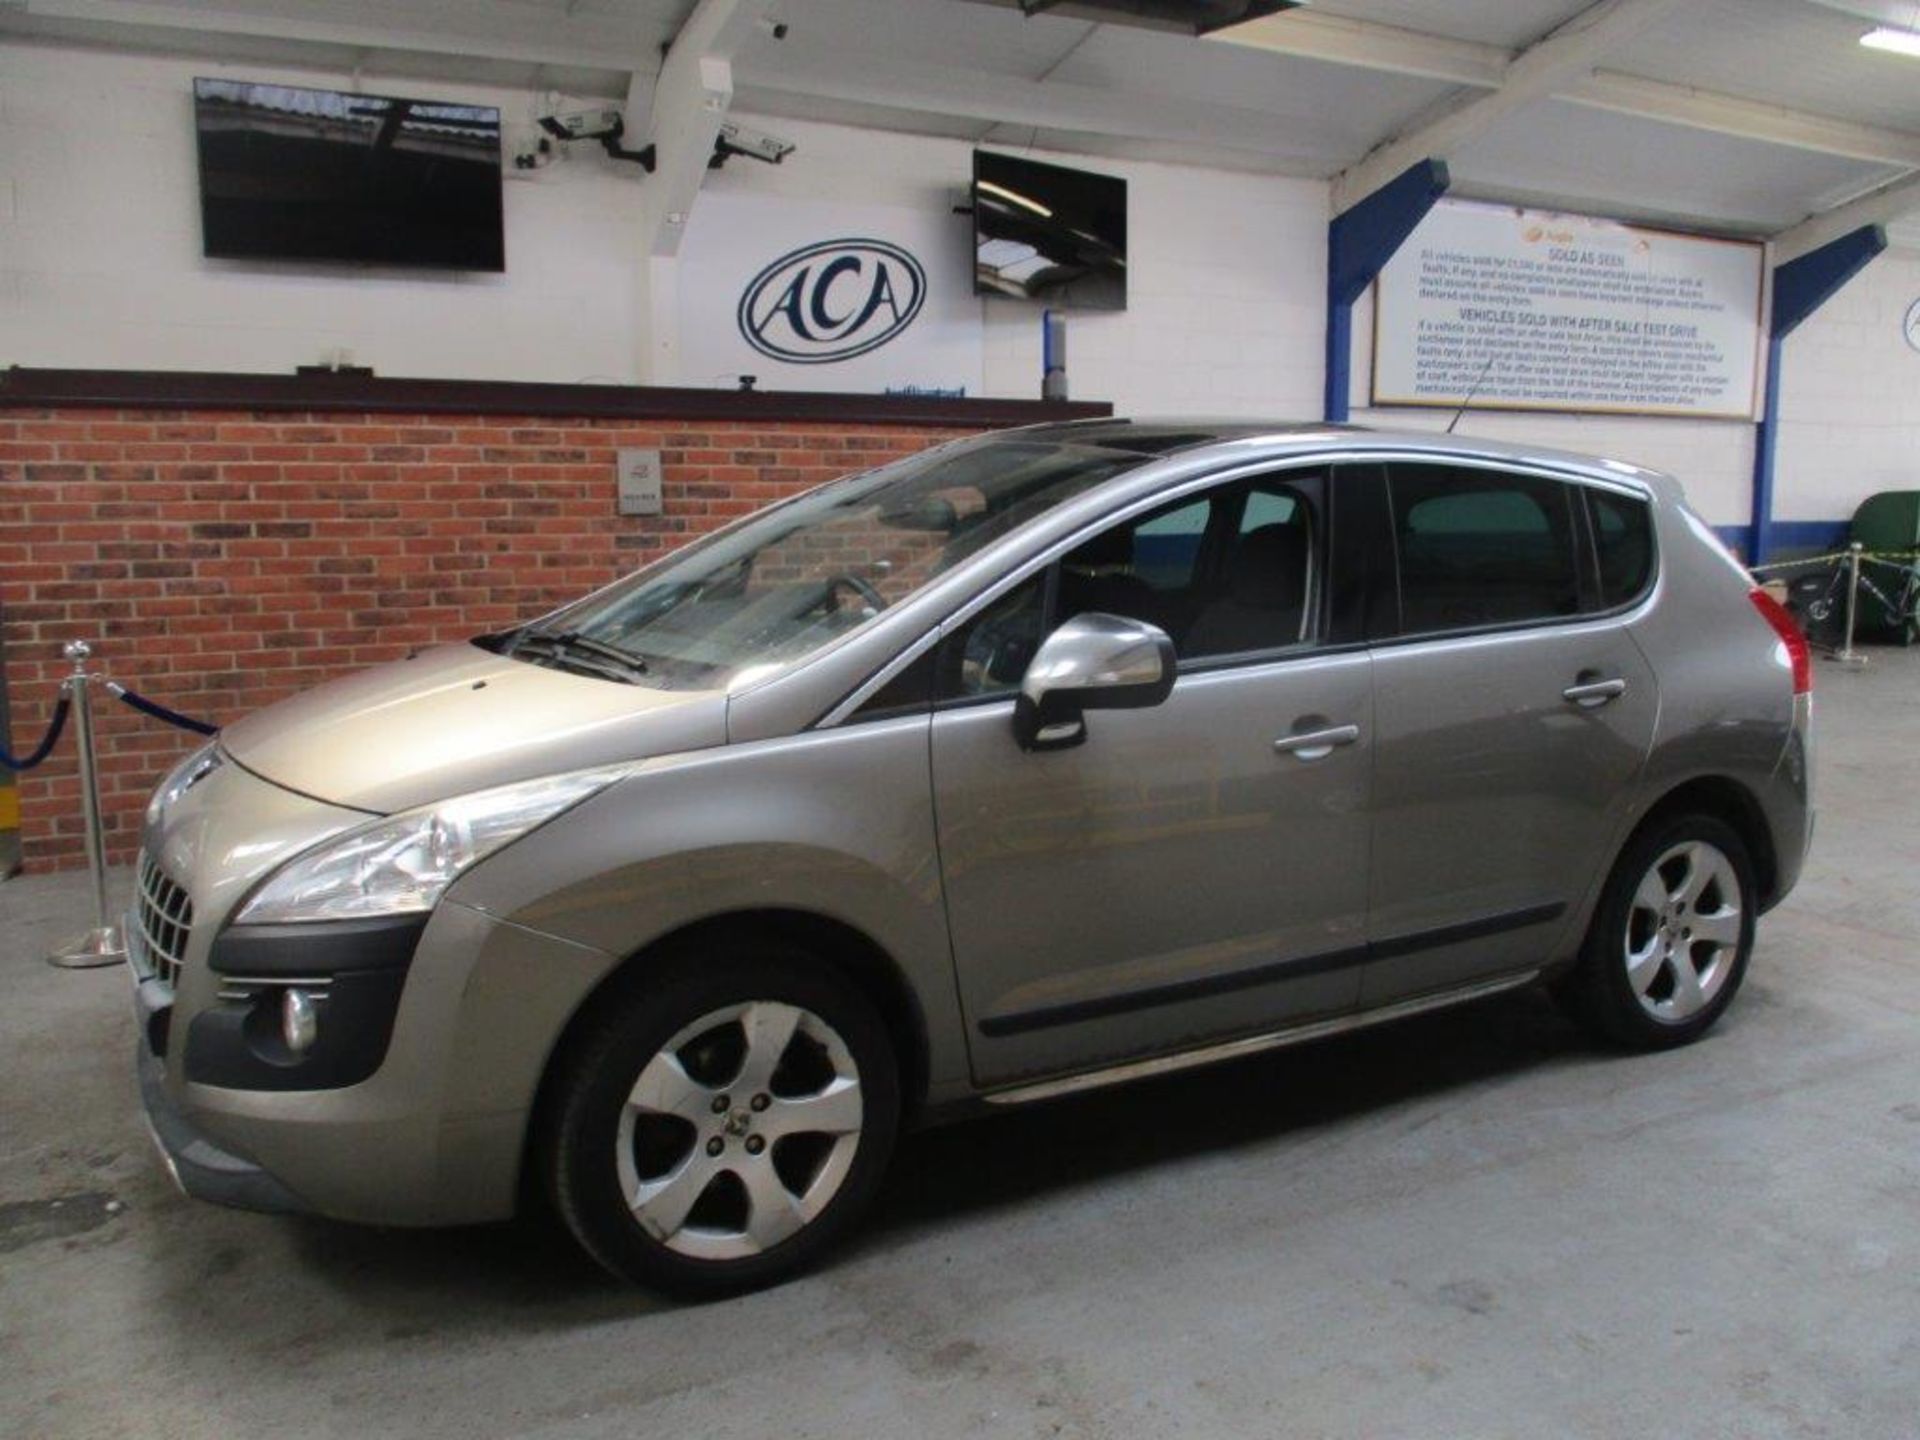 61 11 Peugeot 3008 Exclusive HDI - Image 2 of 24